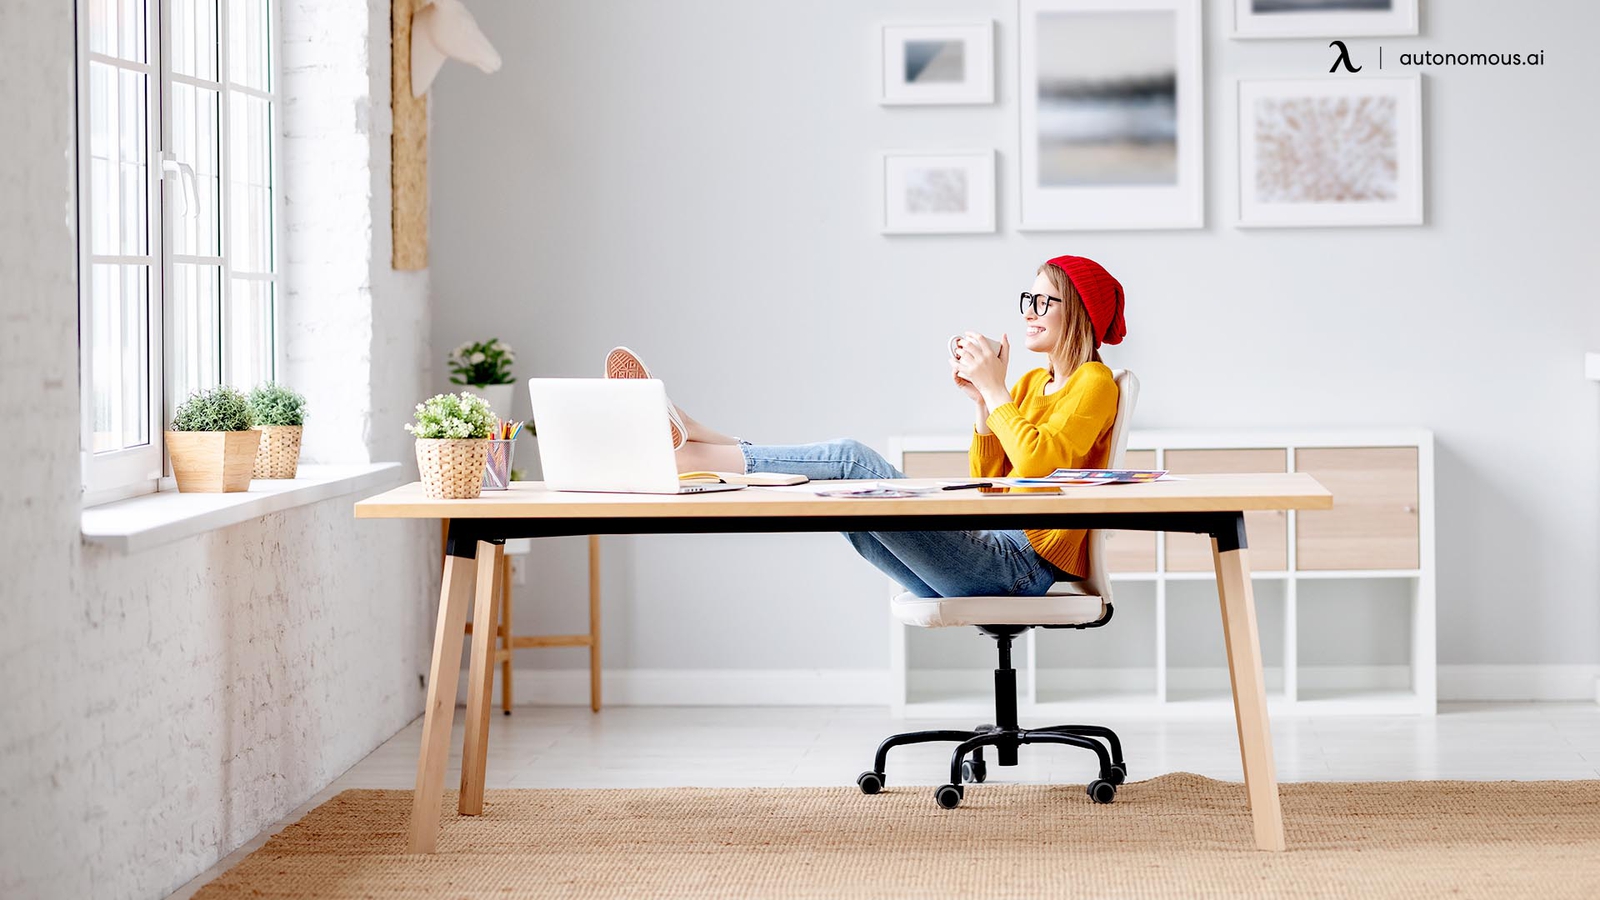 Taking Breaks When Working From Home: What to Do